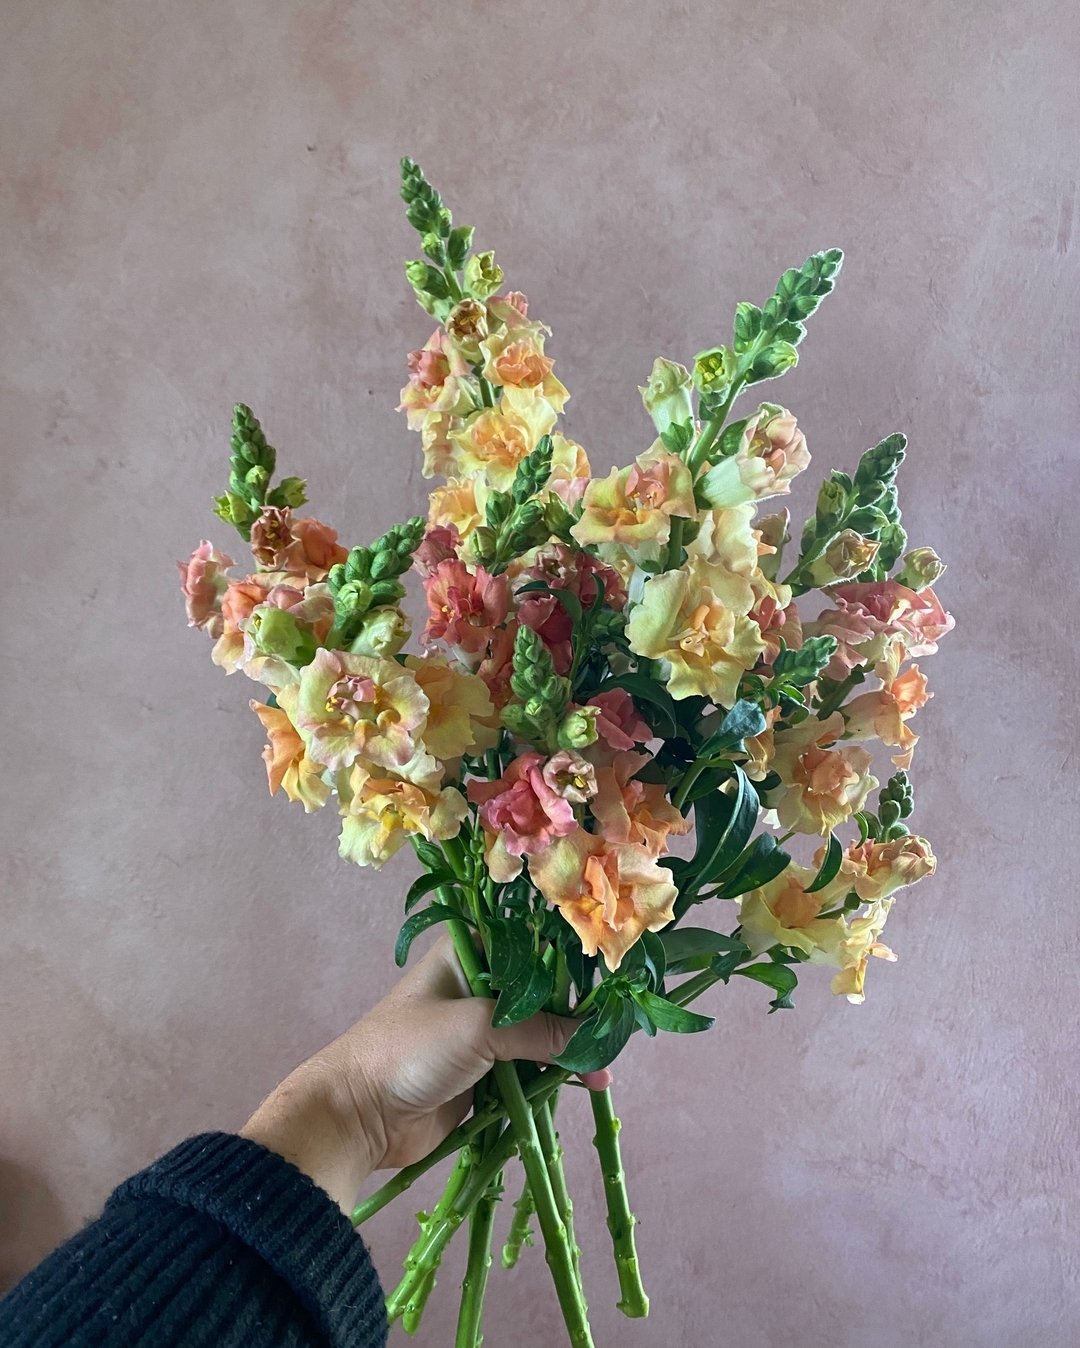 A new variety we trialed this year, Antirrhinum or Snapdragon &lsquo;Doubleshot Peach&rsquo;. Not as tall as some of the Chantilly or Madame double varieties but very branch-y and super productive. The color is really good too, with an interesting mi